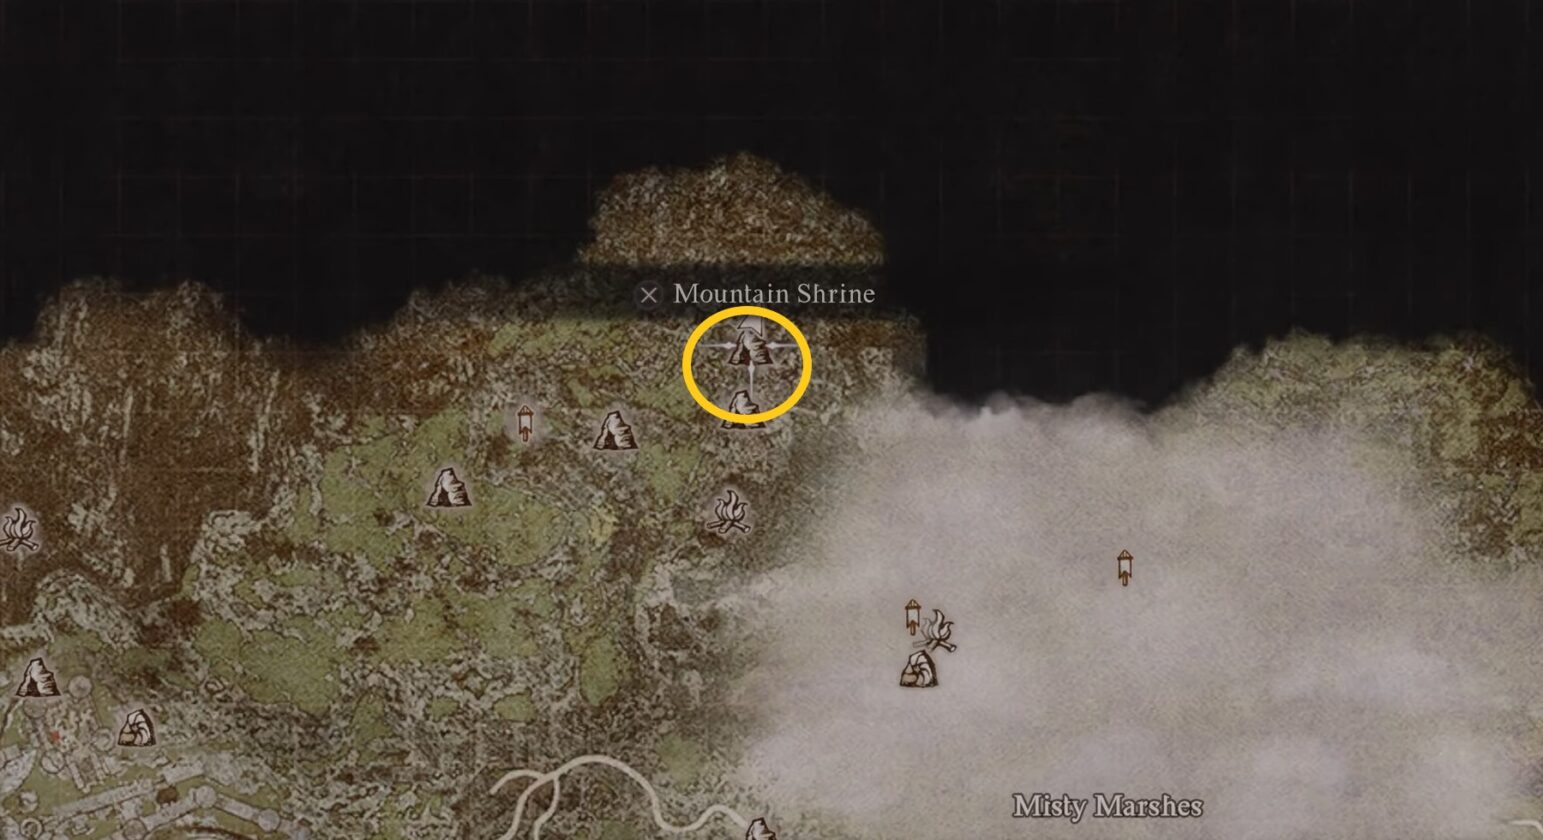 Sphinx location to find Portcrystals in Dragon's Dogma 2